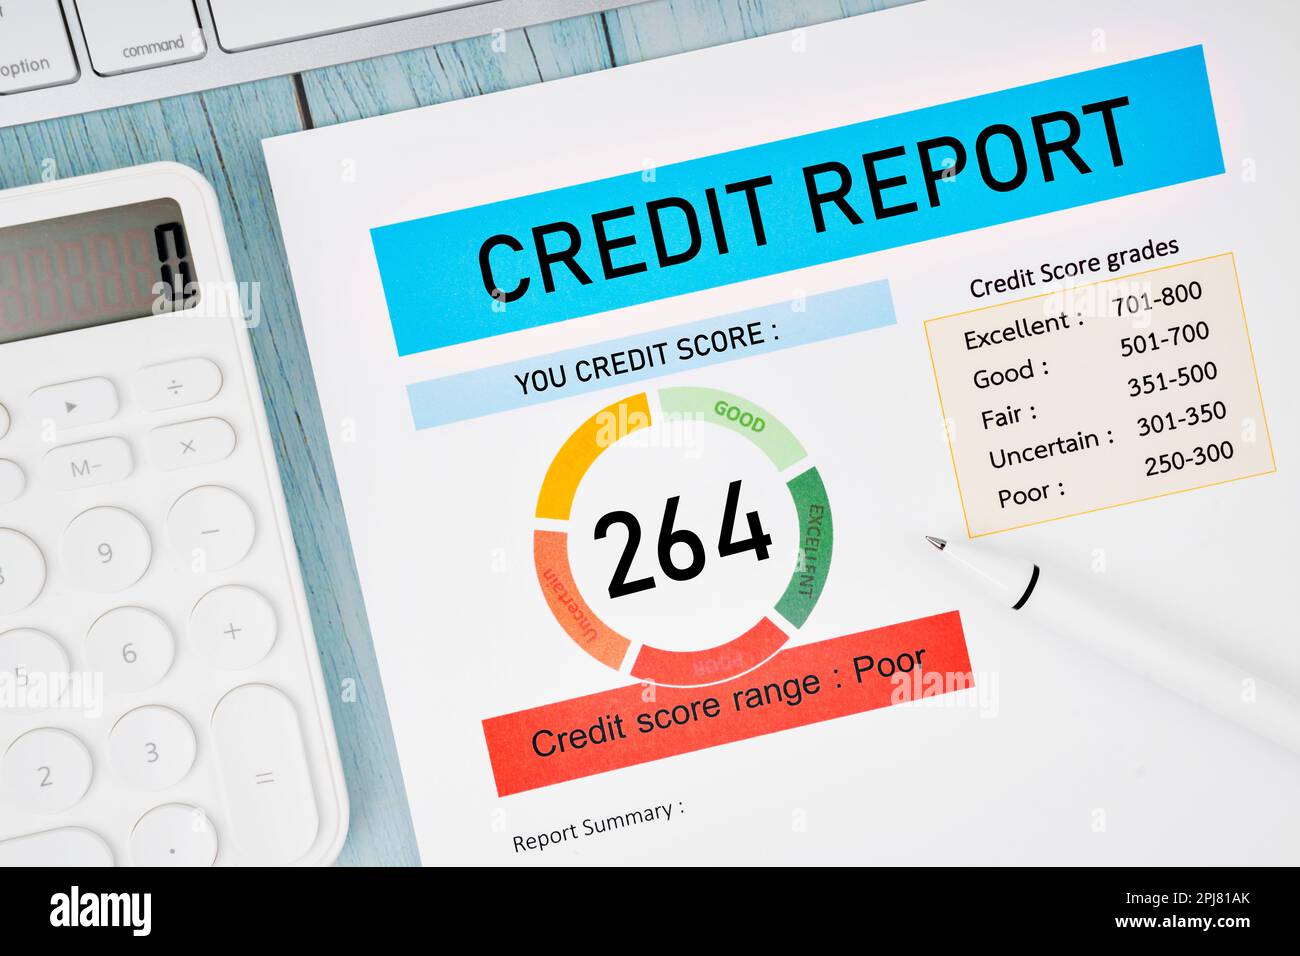 Credit score report document and pen with calculator on the desk. Stock Photo